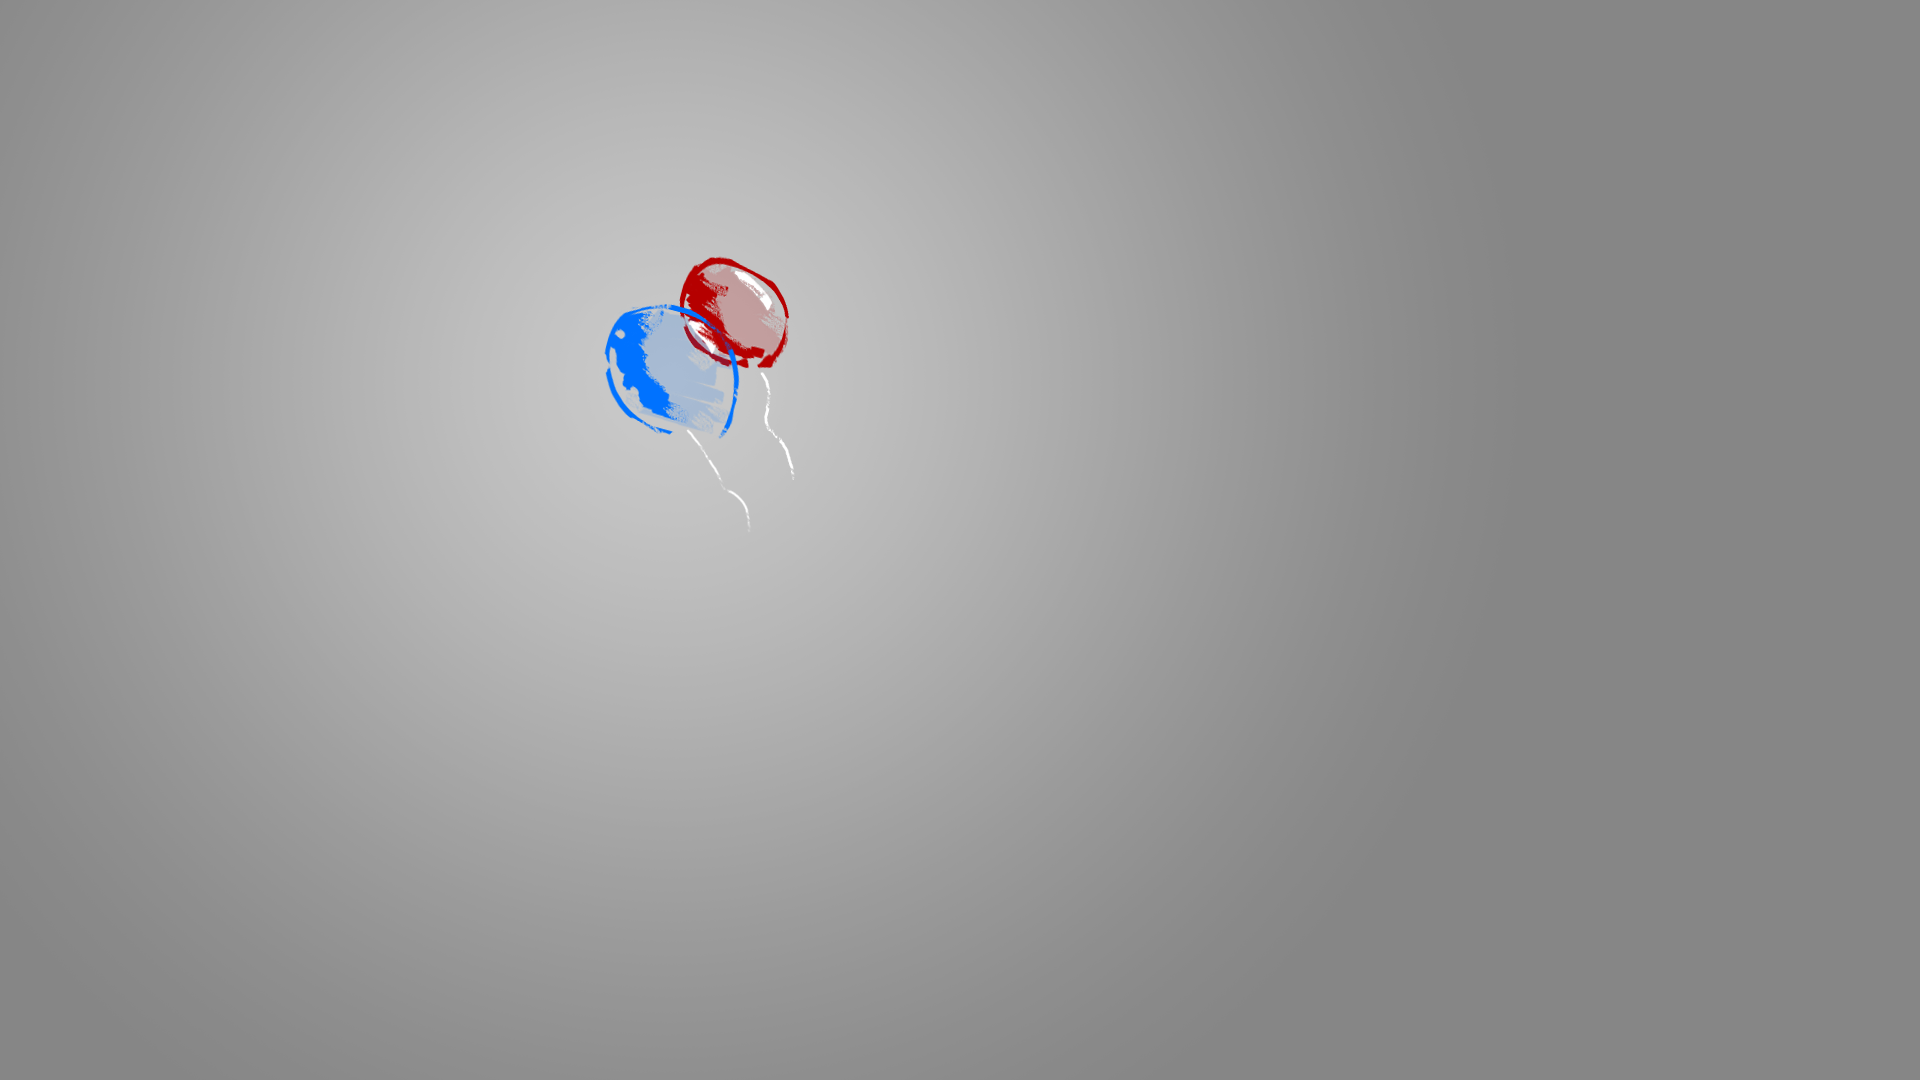 General 1920x1080 balloon red blue gray minimalism simple background gray background